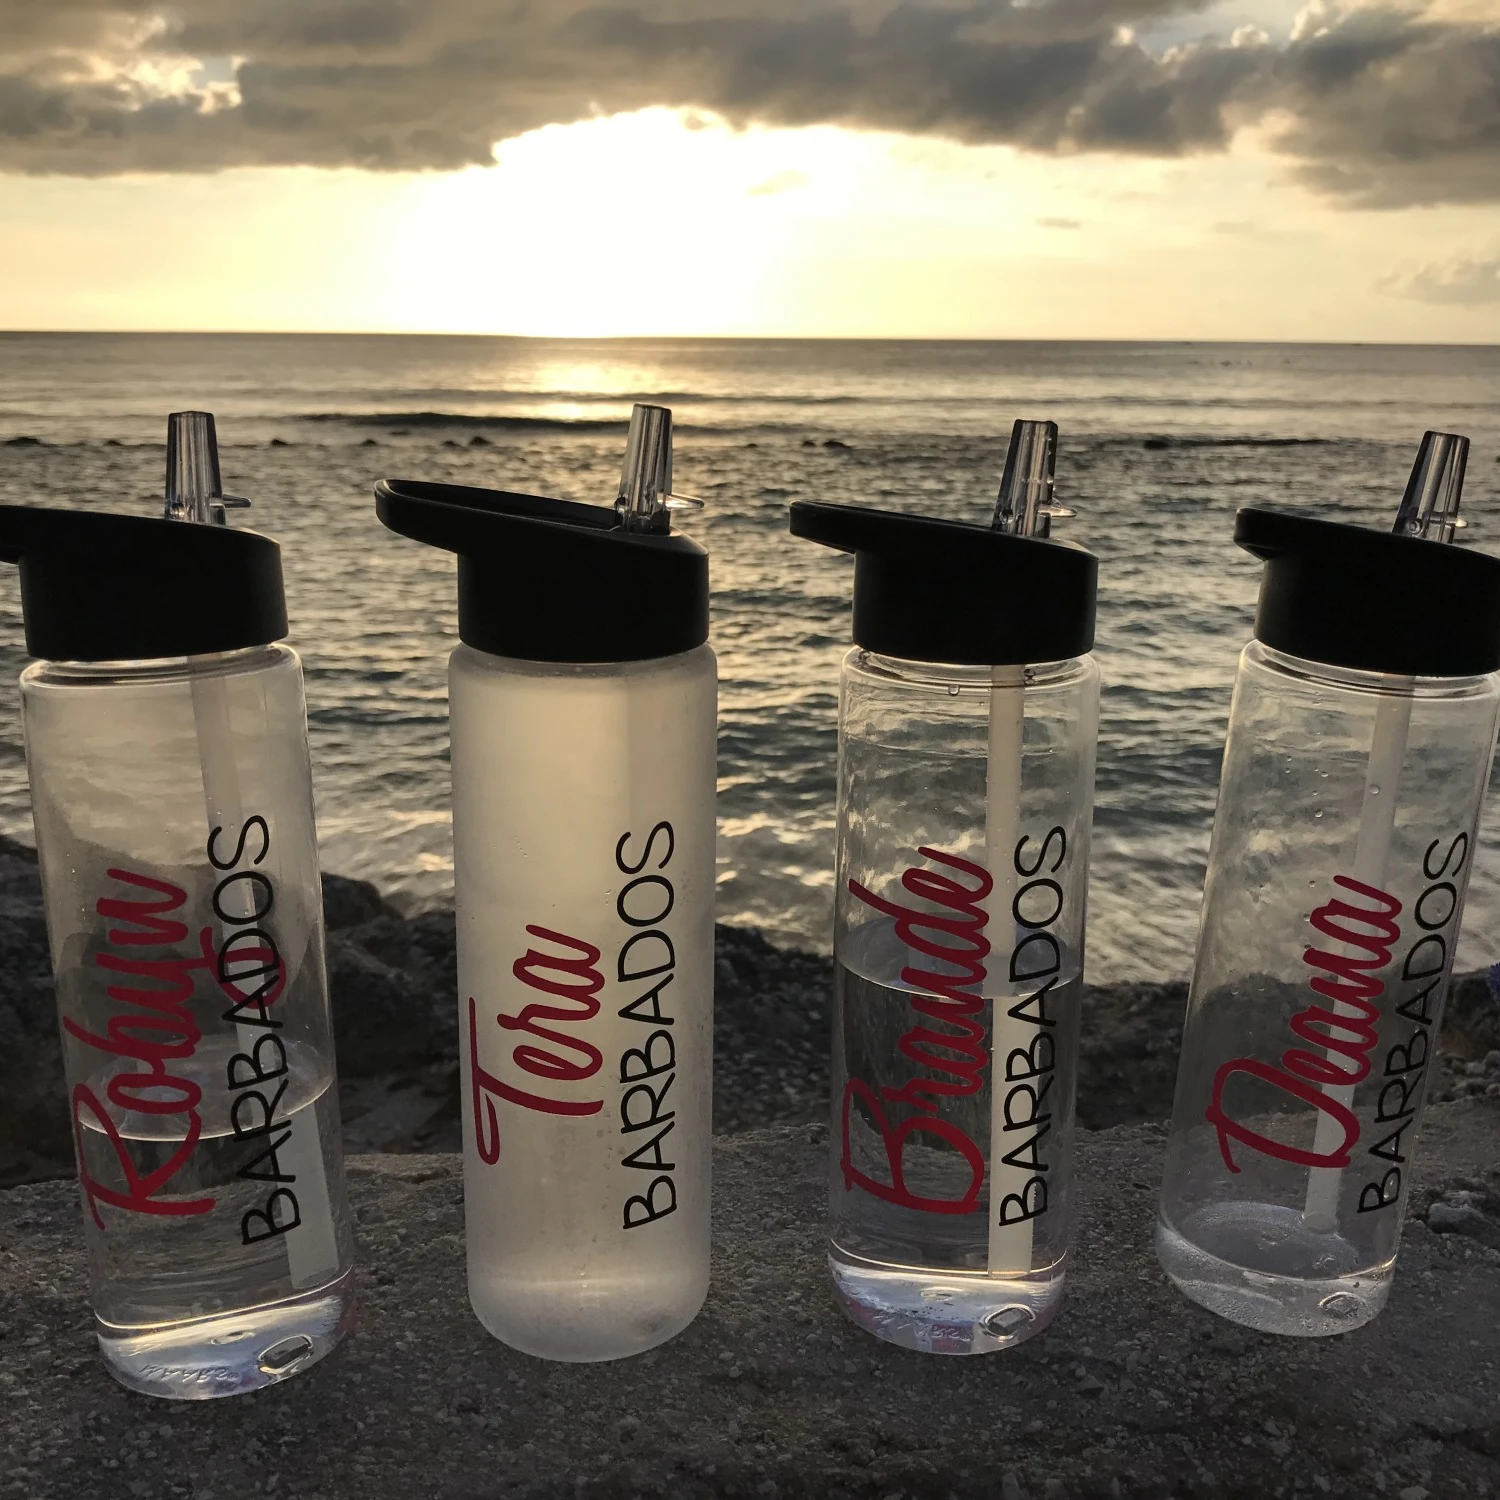 Four water bottles on a beach.